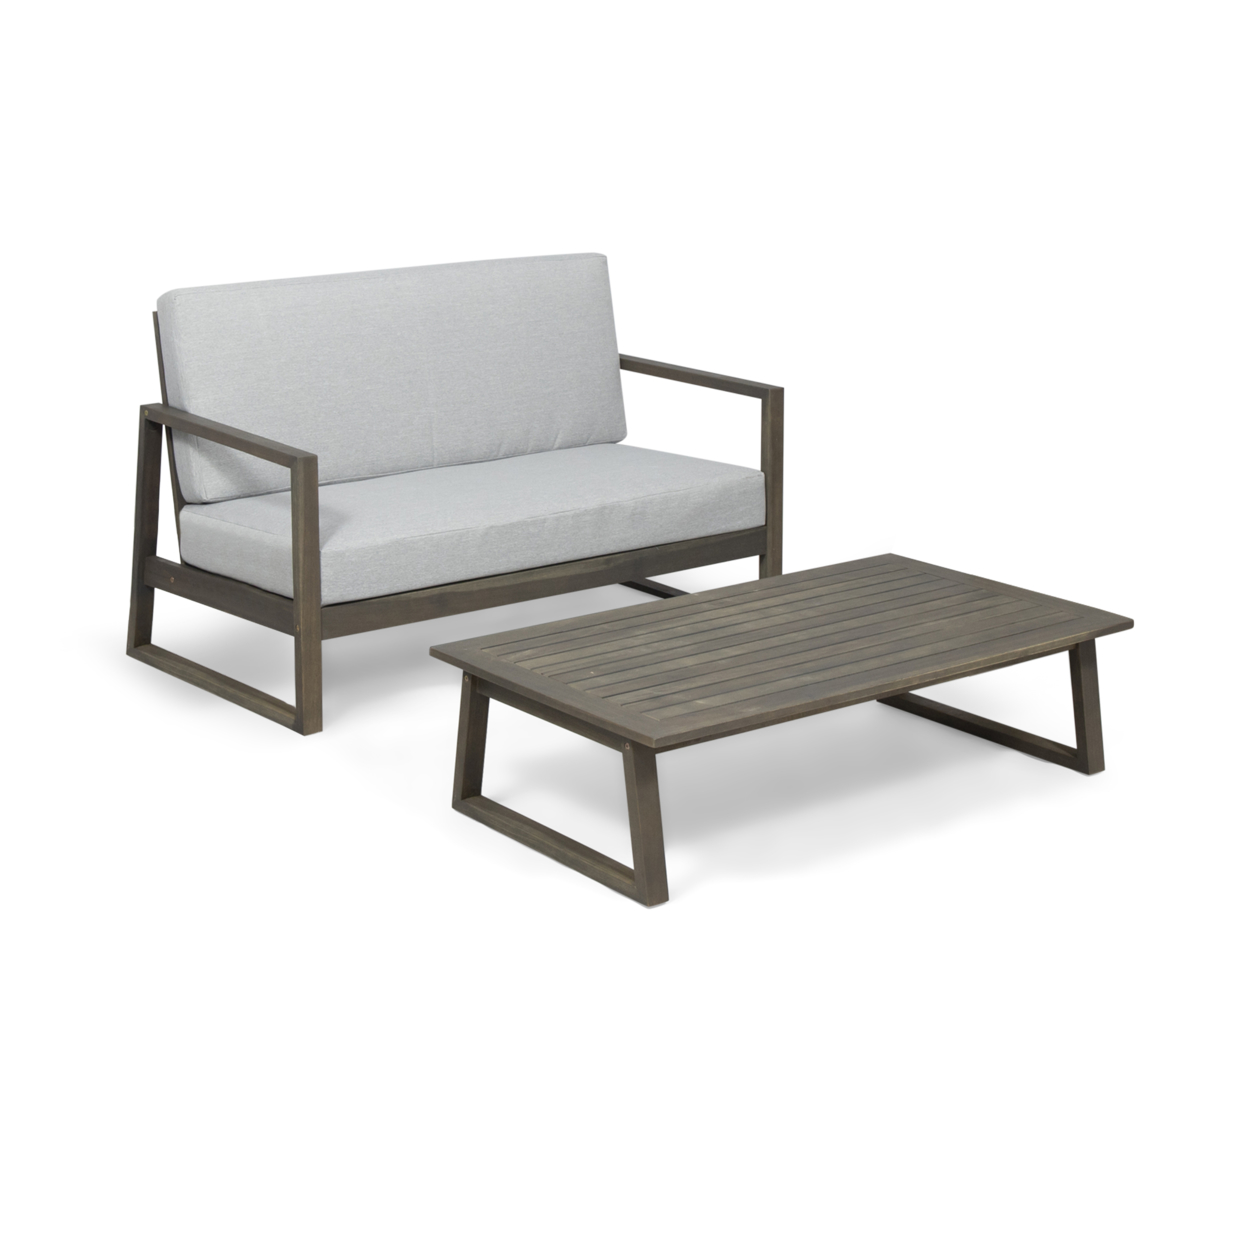 Angelia Outdoor Acacia Wood Chat Set With Coffee Table - Gray Finish, Light Gray